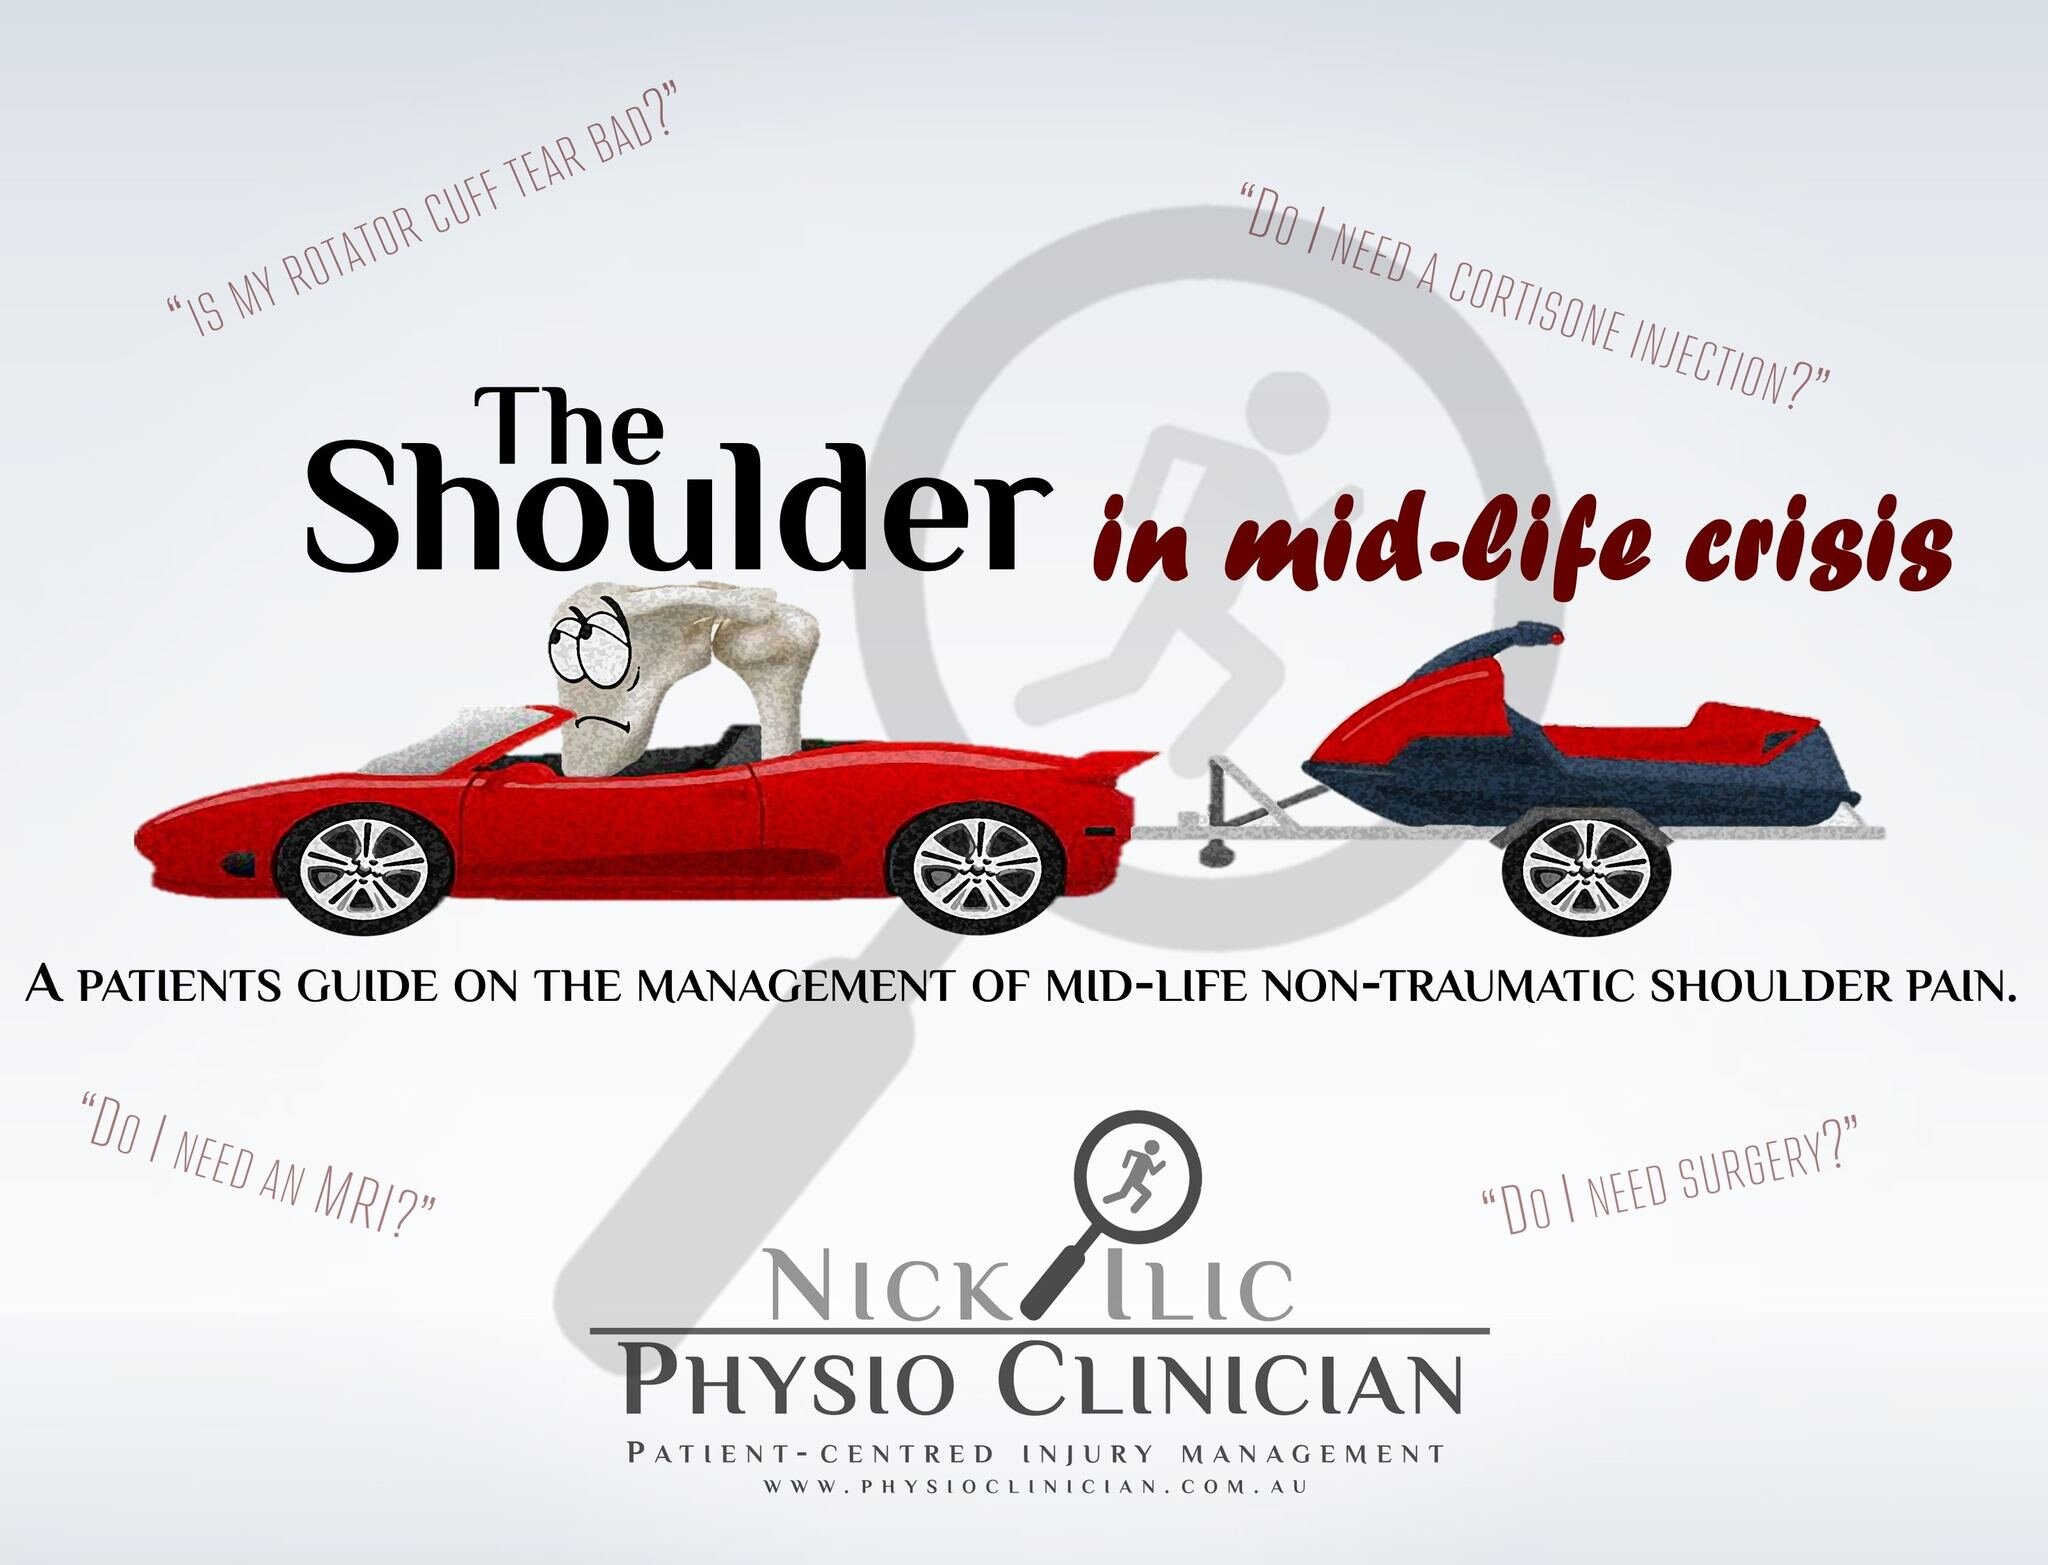 Two new Patient Guides!

⭐ Blogpost #31: A Patients Guide on the Management of 🧊Frozen Shoulder🧊- Evidence-based Conservative and Specialist Treatment Pathways for Adhesive Capsulitis ⭐

⭐ Blogpost #32: The  Shoulder in Mid-Life Crisis &ndash; A pa